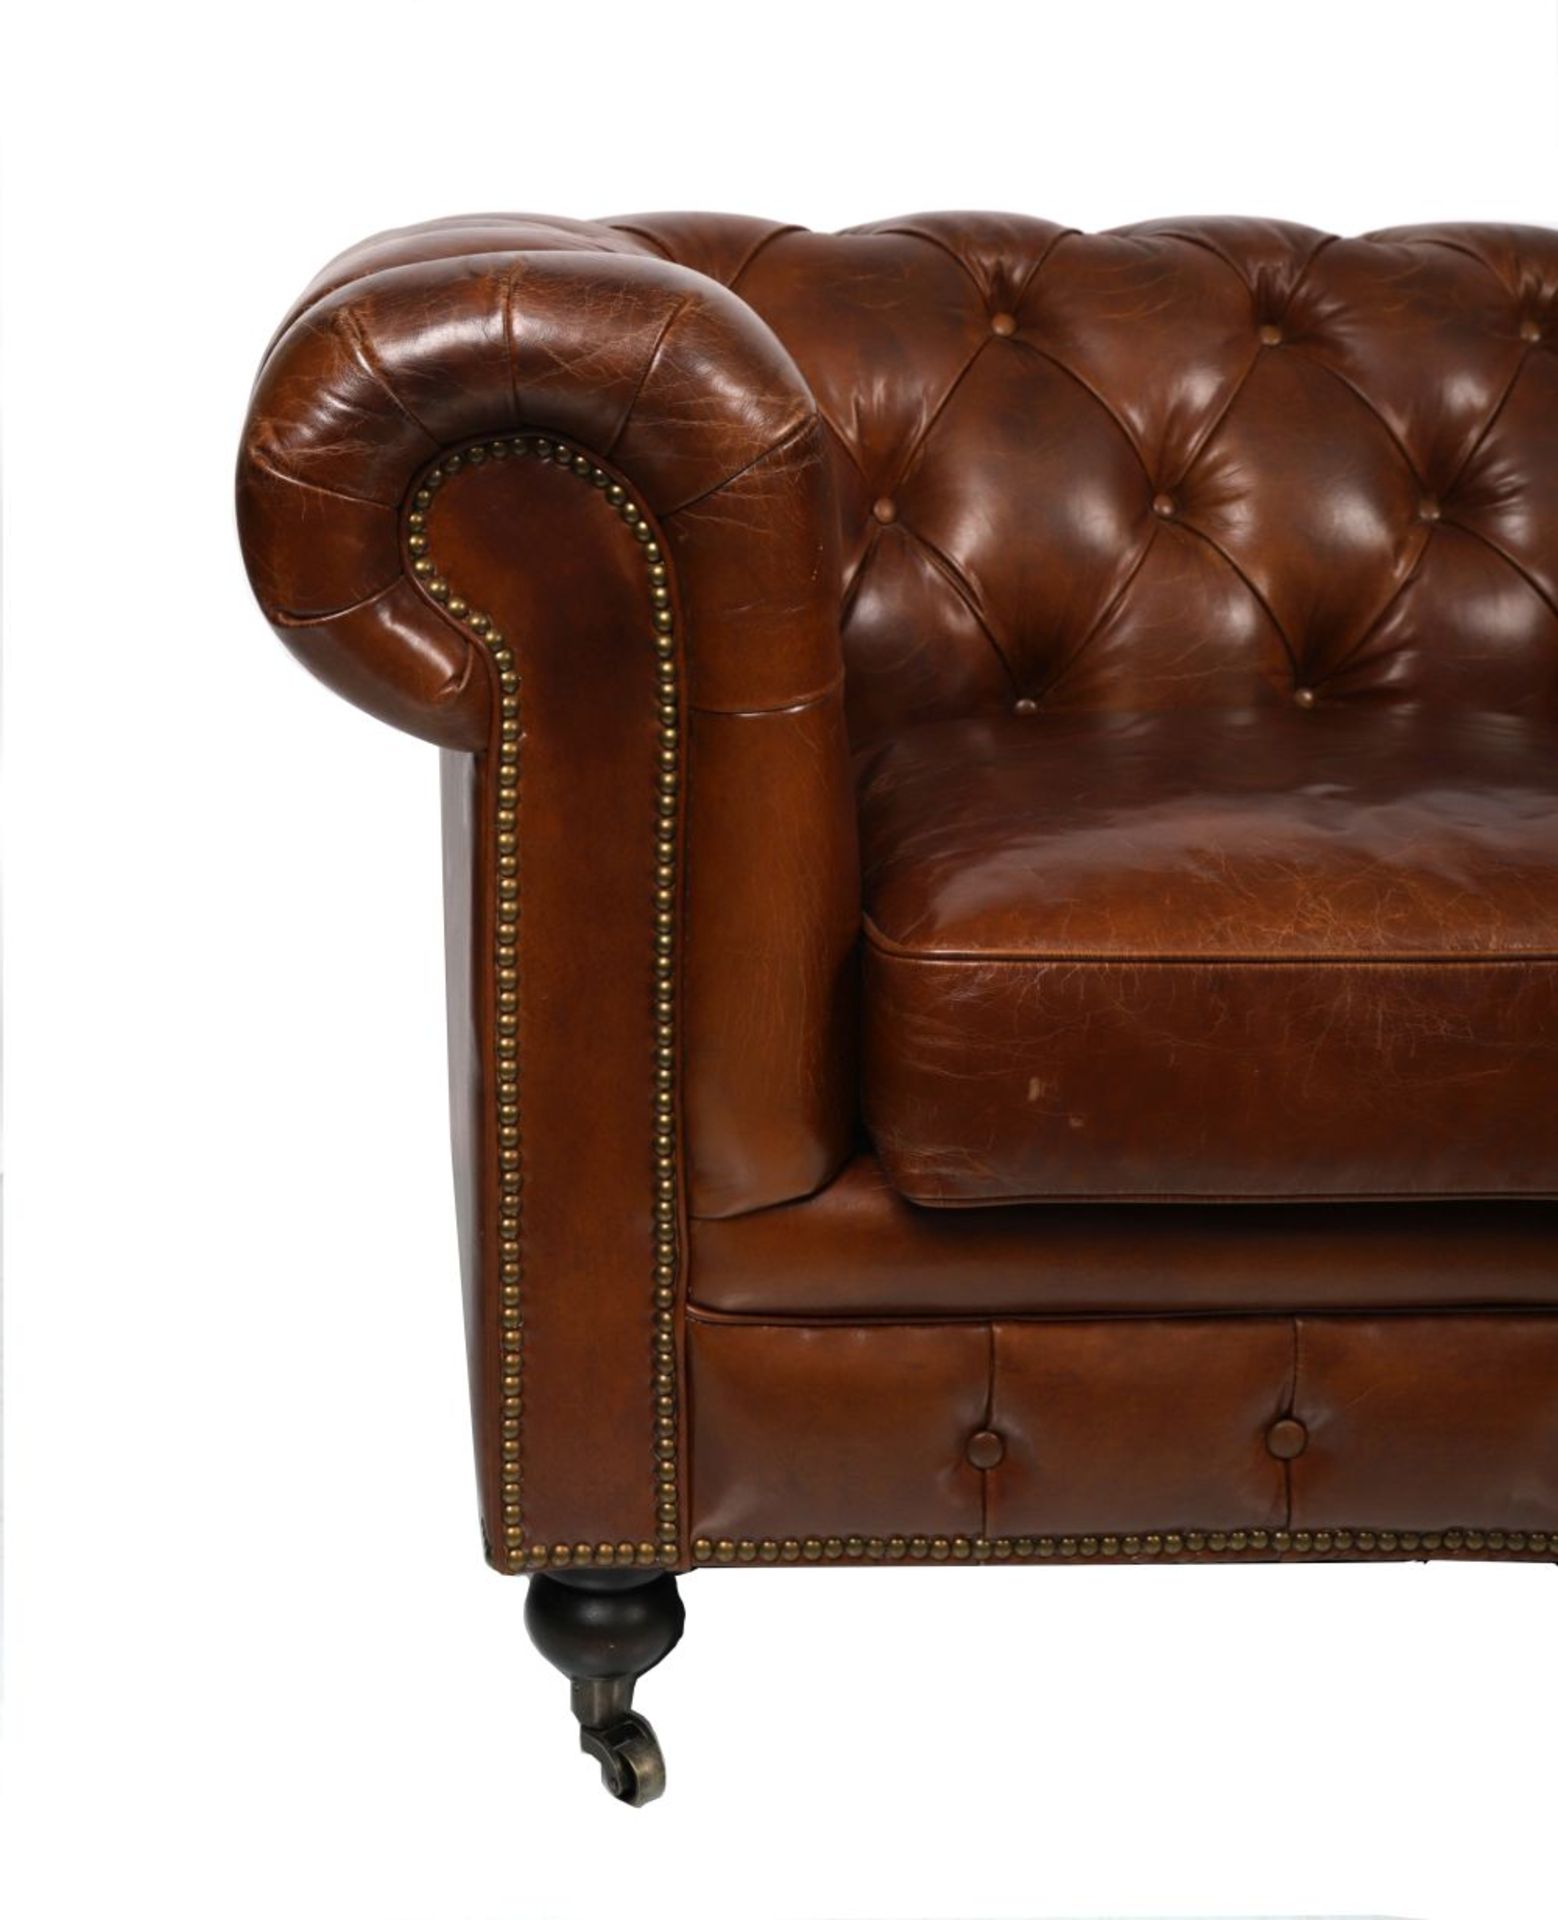 HIDE UPHOLSTERED CHESTERFIELD SETTEE - Image 2 of 2